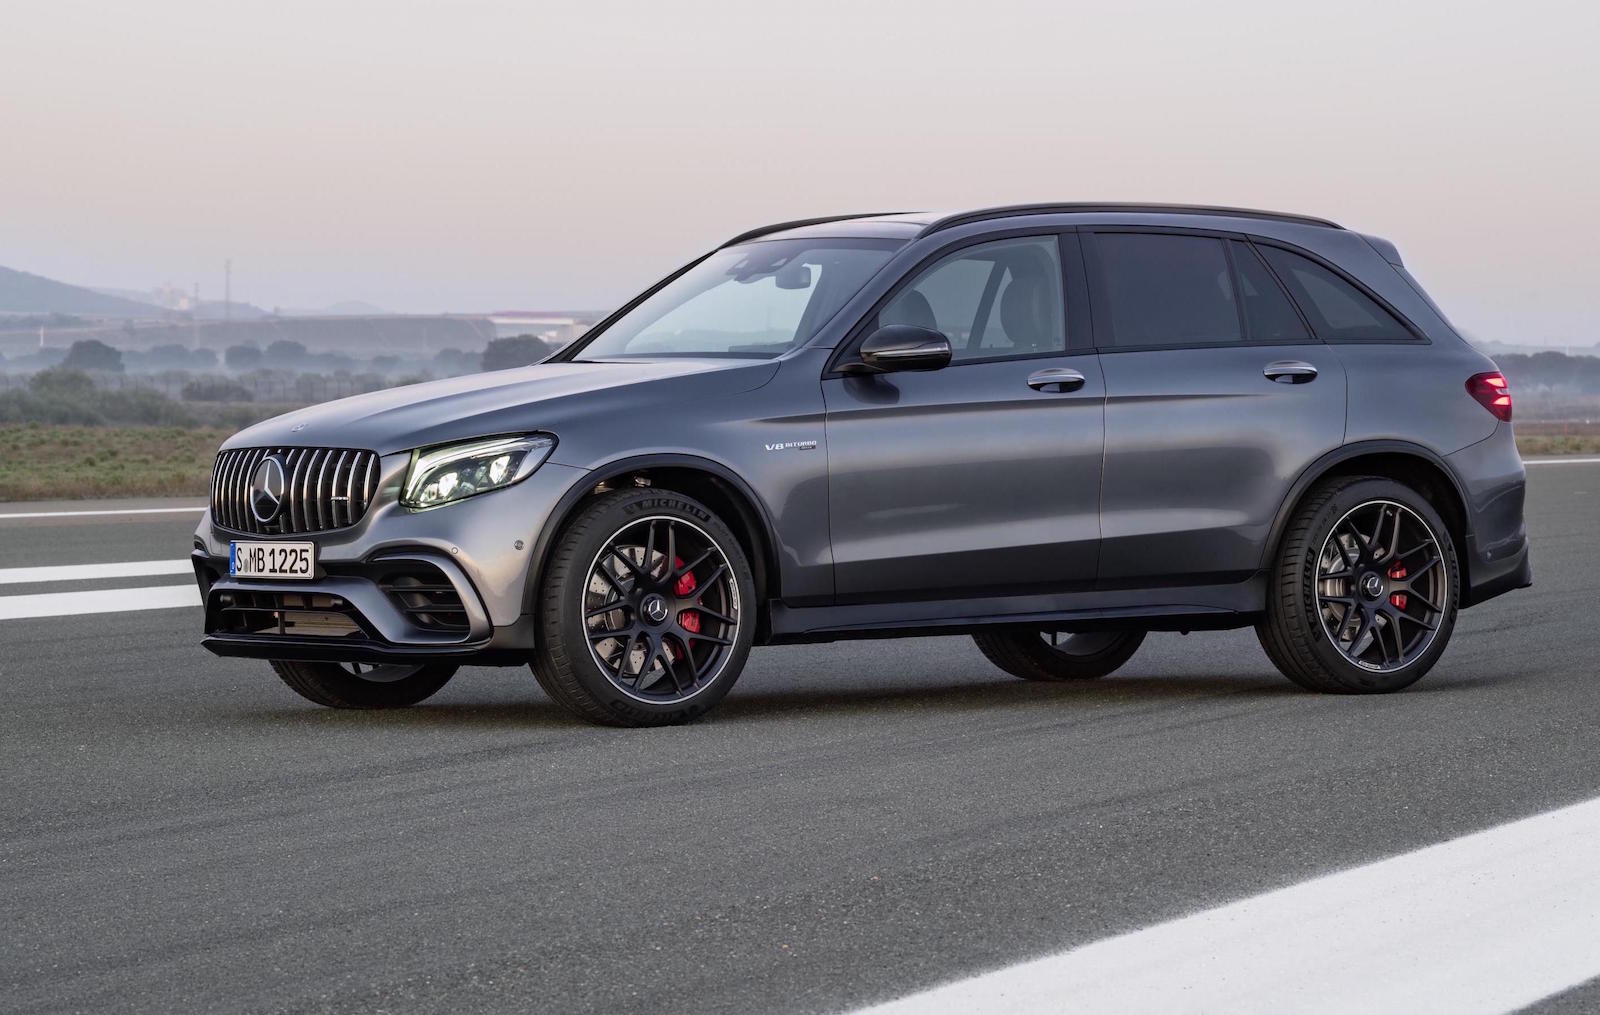 Mercedes Amg Glc 63 Revealed Most Powerful Suv In The Class